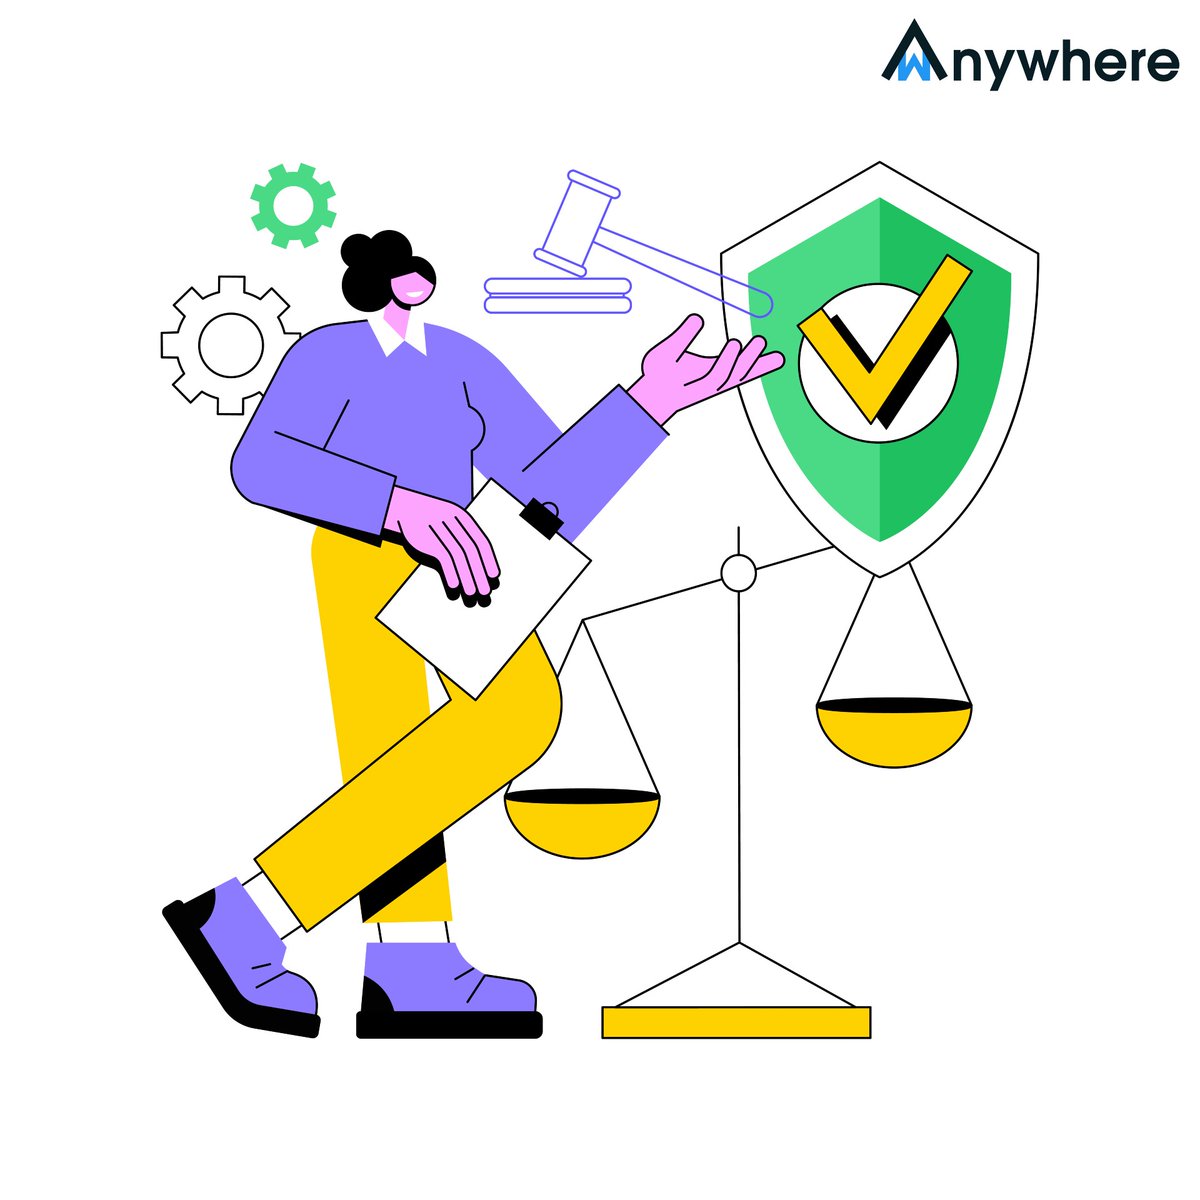 AI is growing in use for #monitoringemployeeproductivity and #performance at the #workplace. Know how to balance between #remoteemployeemonitoring and #privacy with the right approach. shorturl.at/boKOW #performance #activitytracking 
#trackingsoftware #wanywhere